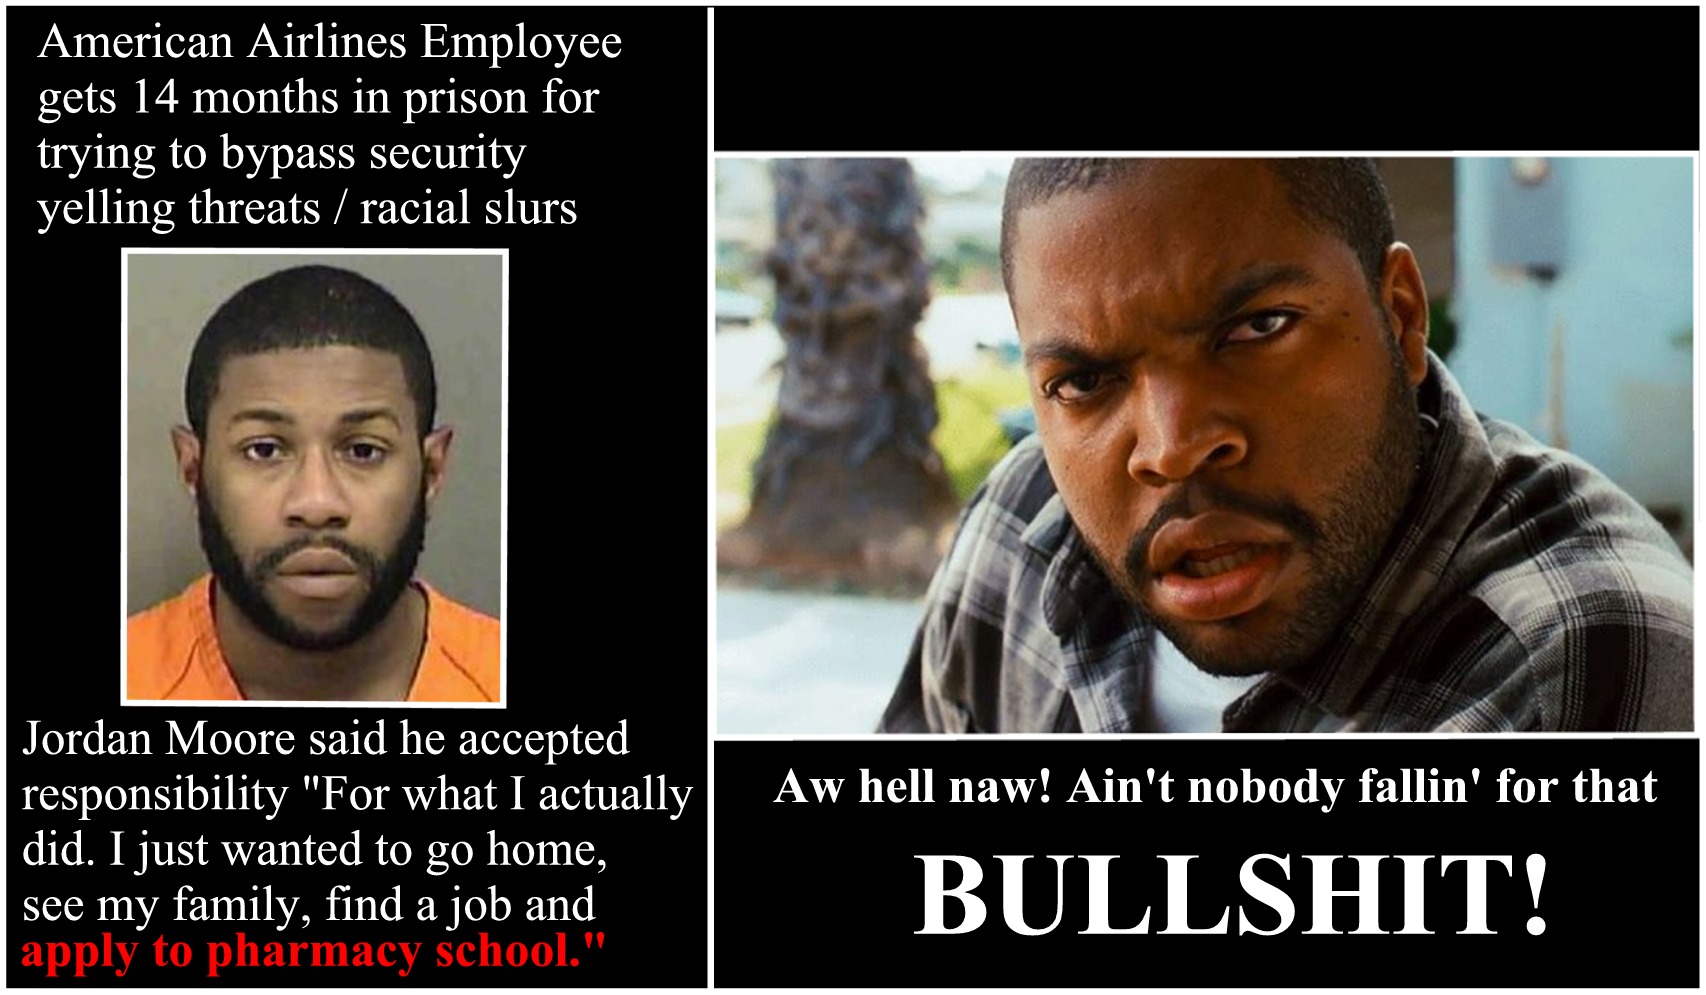 photo caption - American Airlines Employee gets 14 months in prison for trying to bypass security yelling threats racial slurs Lhv | Aw hell naw! Ain't nobody fallin' for that Jordan Moore said he accepted responsibility "For what I actually did. I just w